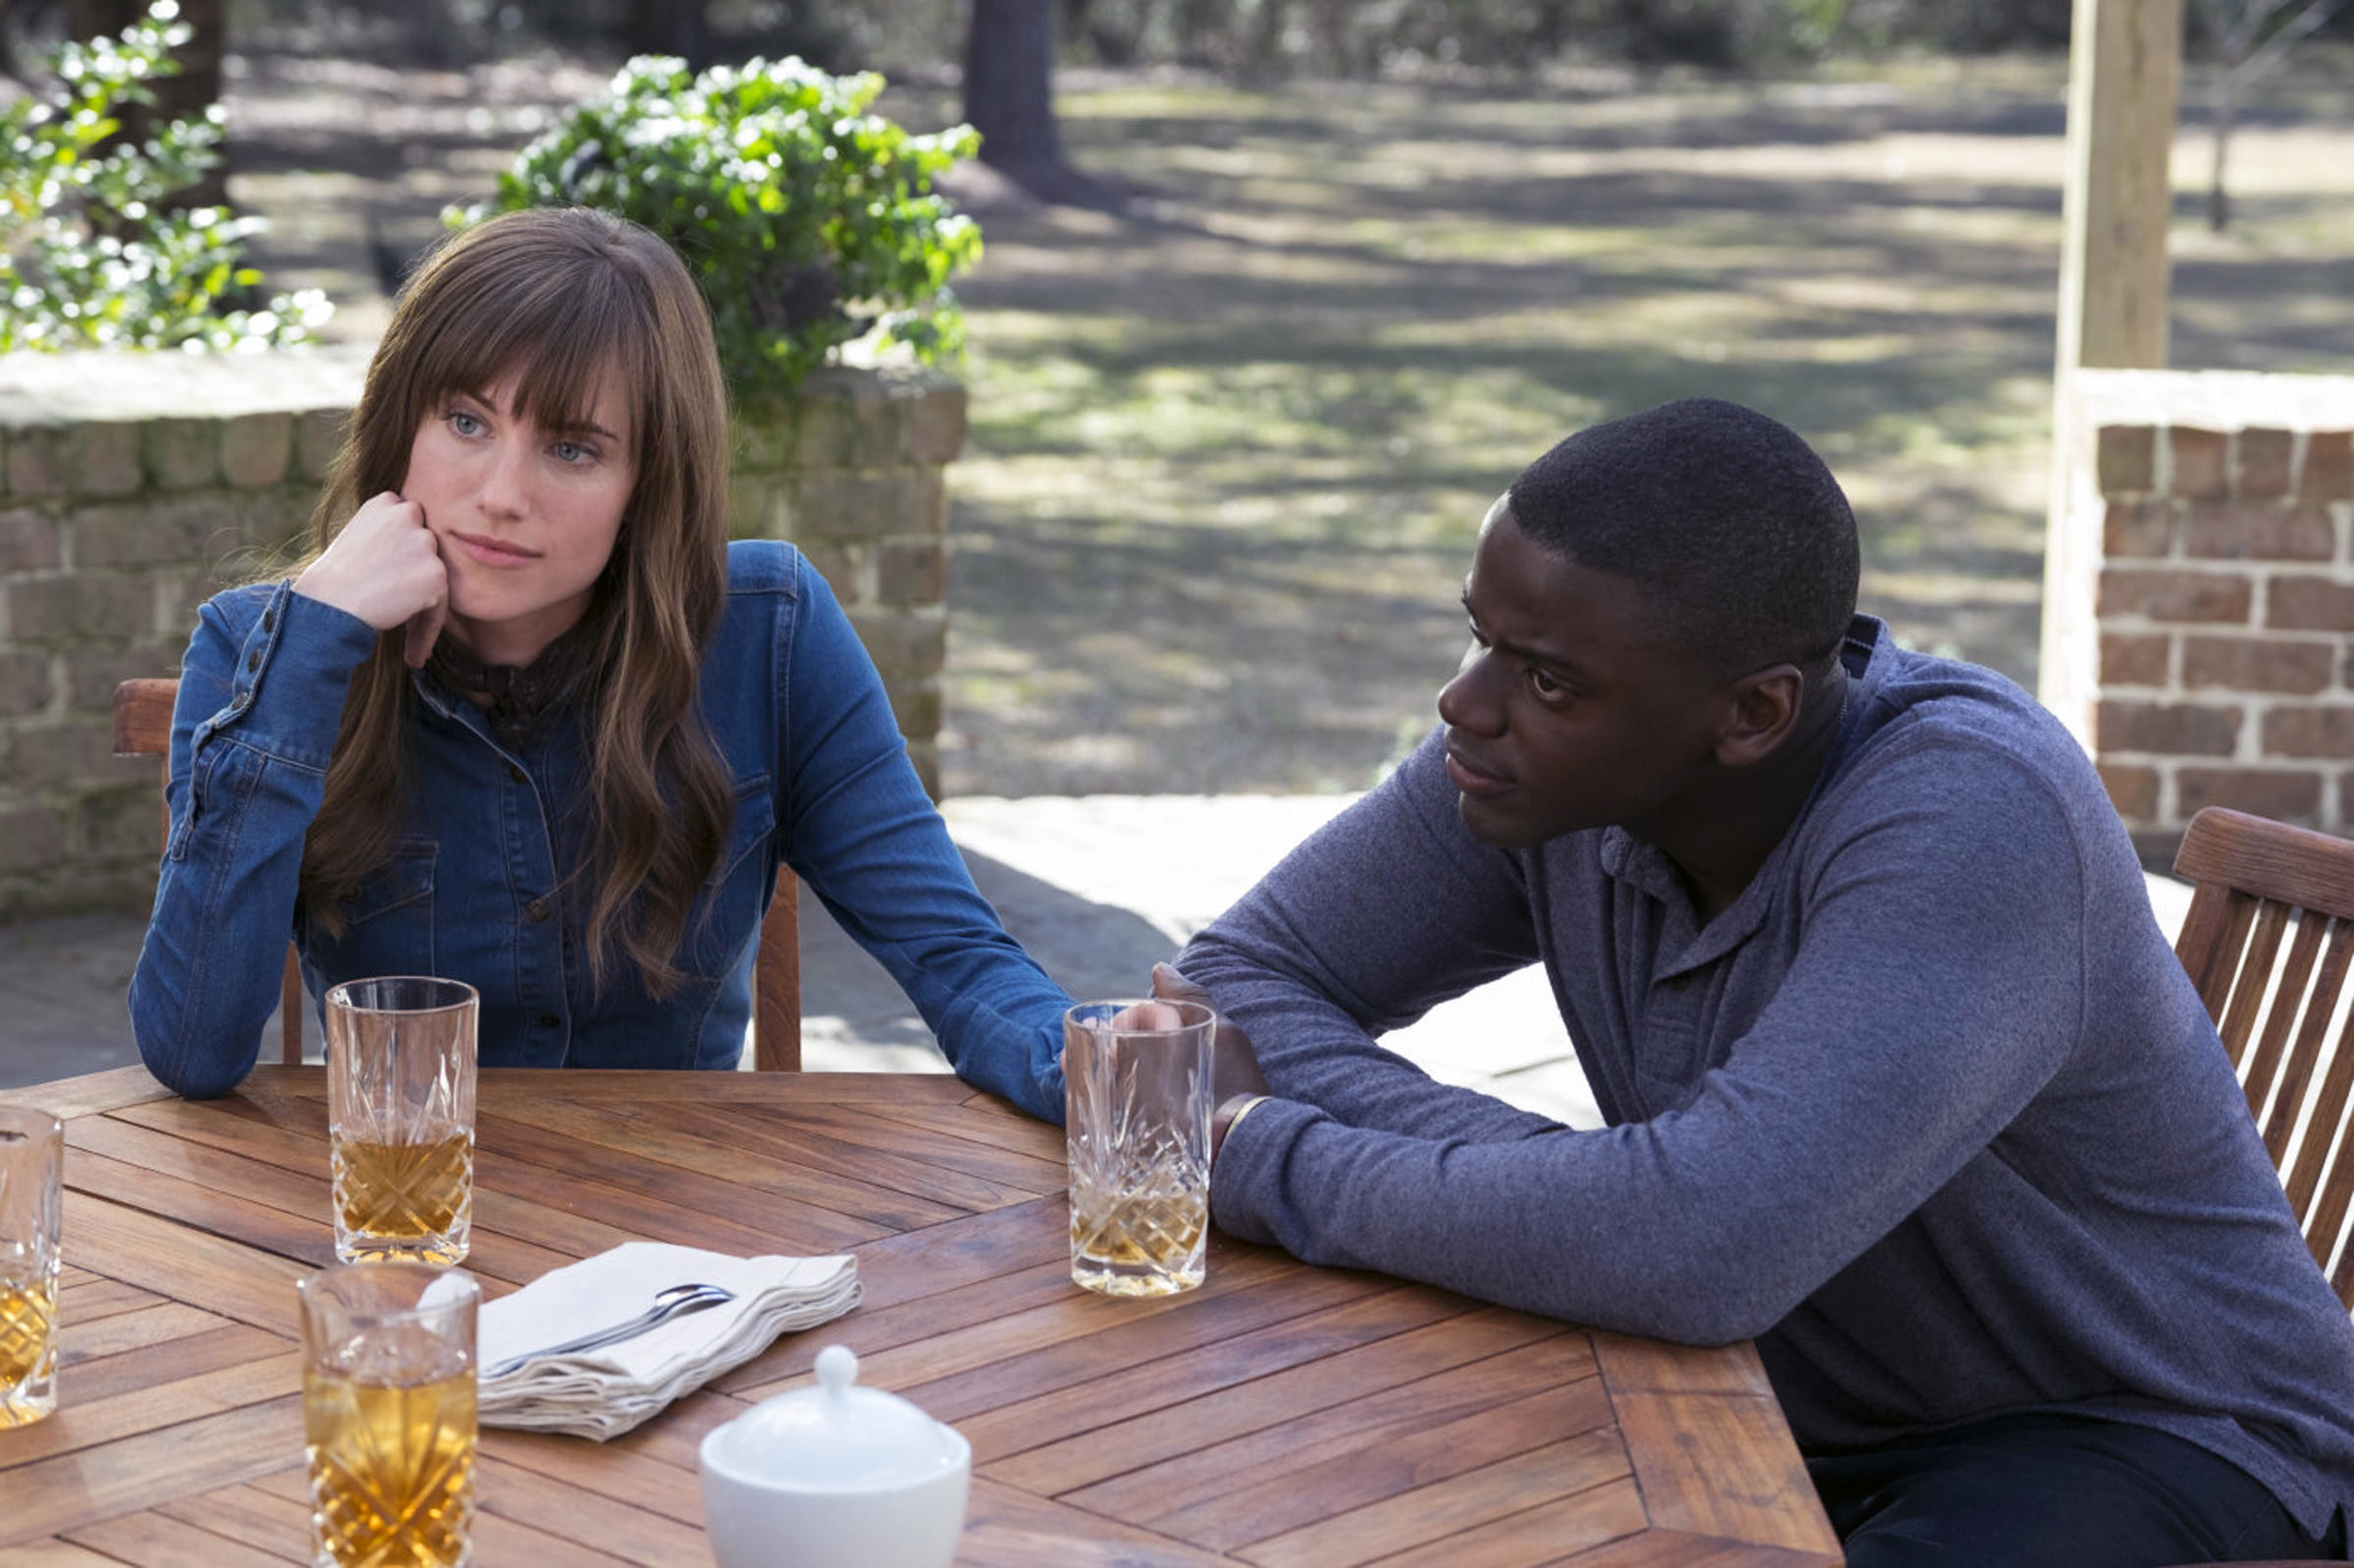 Allison Williams and Daniel Kaluuya sit at a patio table